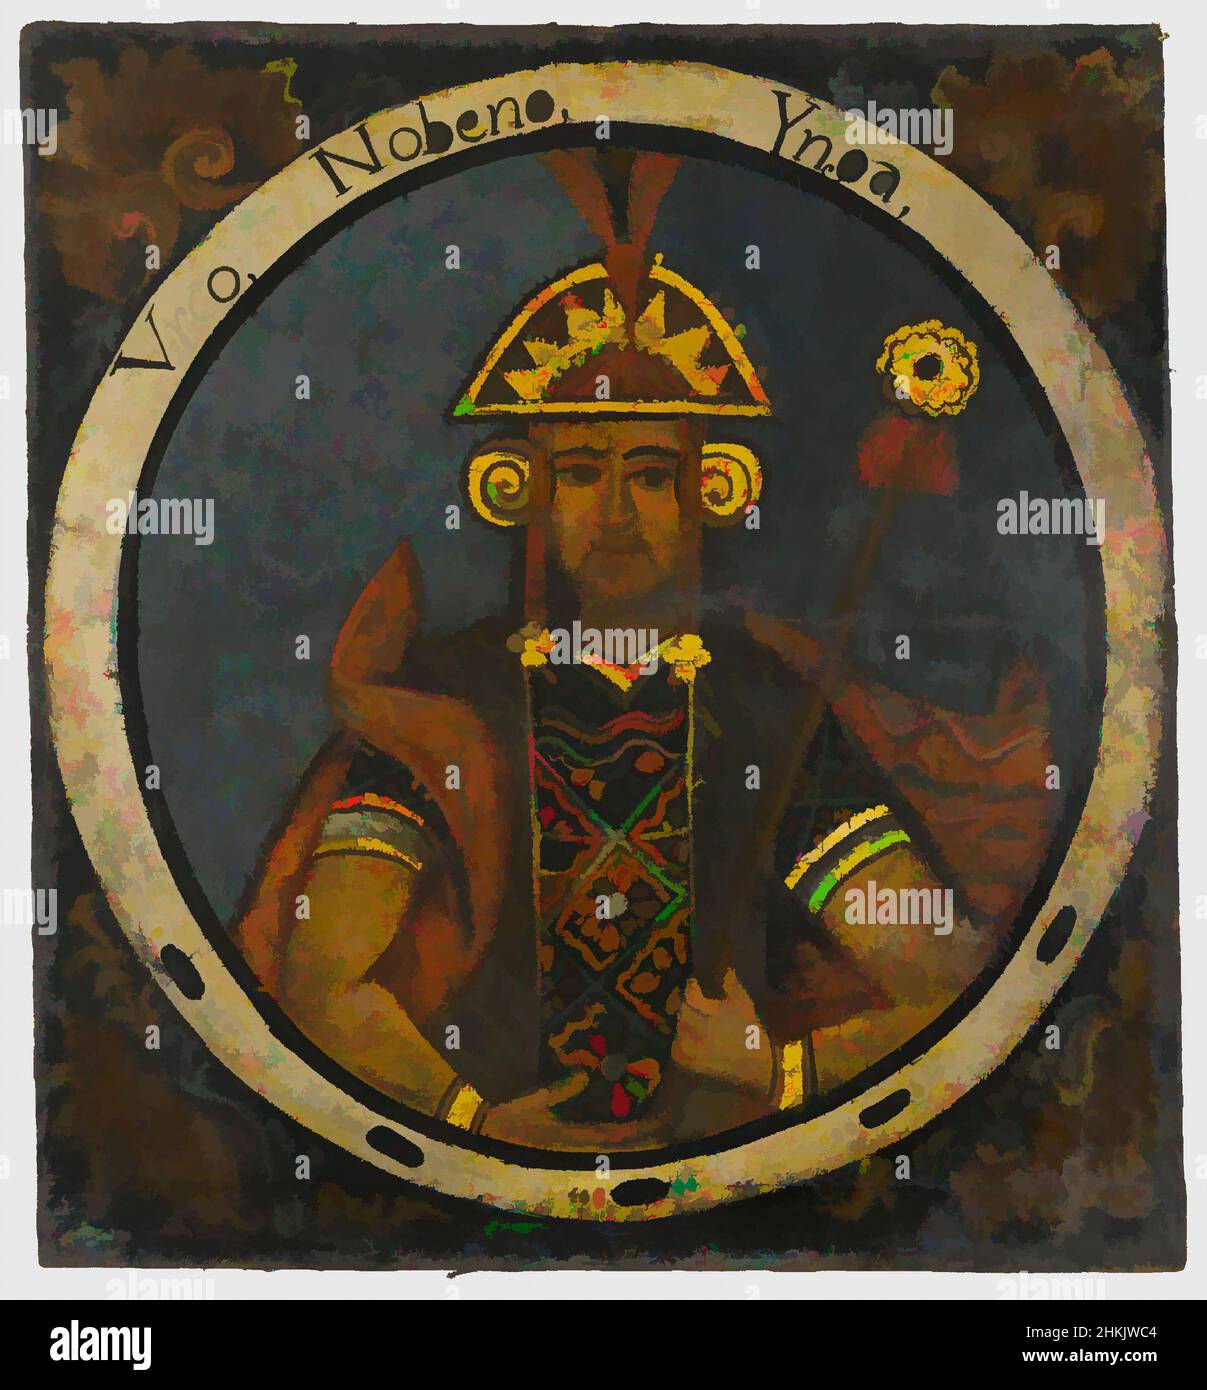 Art inspired by Urco, Ninth Inca, 1 of 14 Portraits of Inca Kings, Peruvian, Oil on canvas, Peru, mid-18th century, probably, Colonial Period, 23 7/16 x 21 9/16in., 59.5 x 54.8cm, armbands, Conquest, earspools, headdress, hispanic heritage, historical, Inca, king, latin american art, Classic works modernized by Artotop with a splash of modernity. Shapes, color and value, eye-catching visual impact on art. Emotions through freedom of artworks in a contemporary way. A timeless message pursuing a wildly creative new direction. Artists turning to the digital medium and creating the Artotop NFT Stock Photo